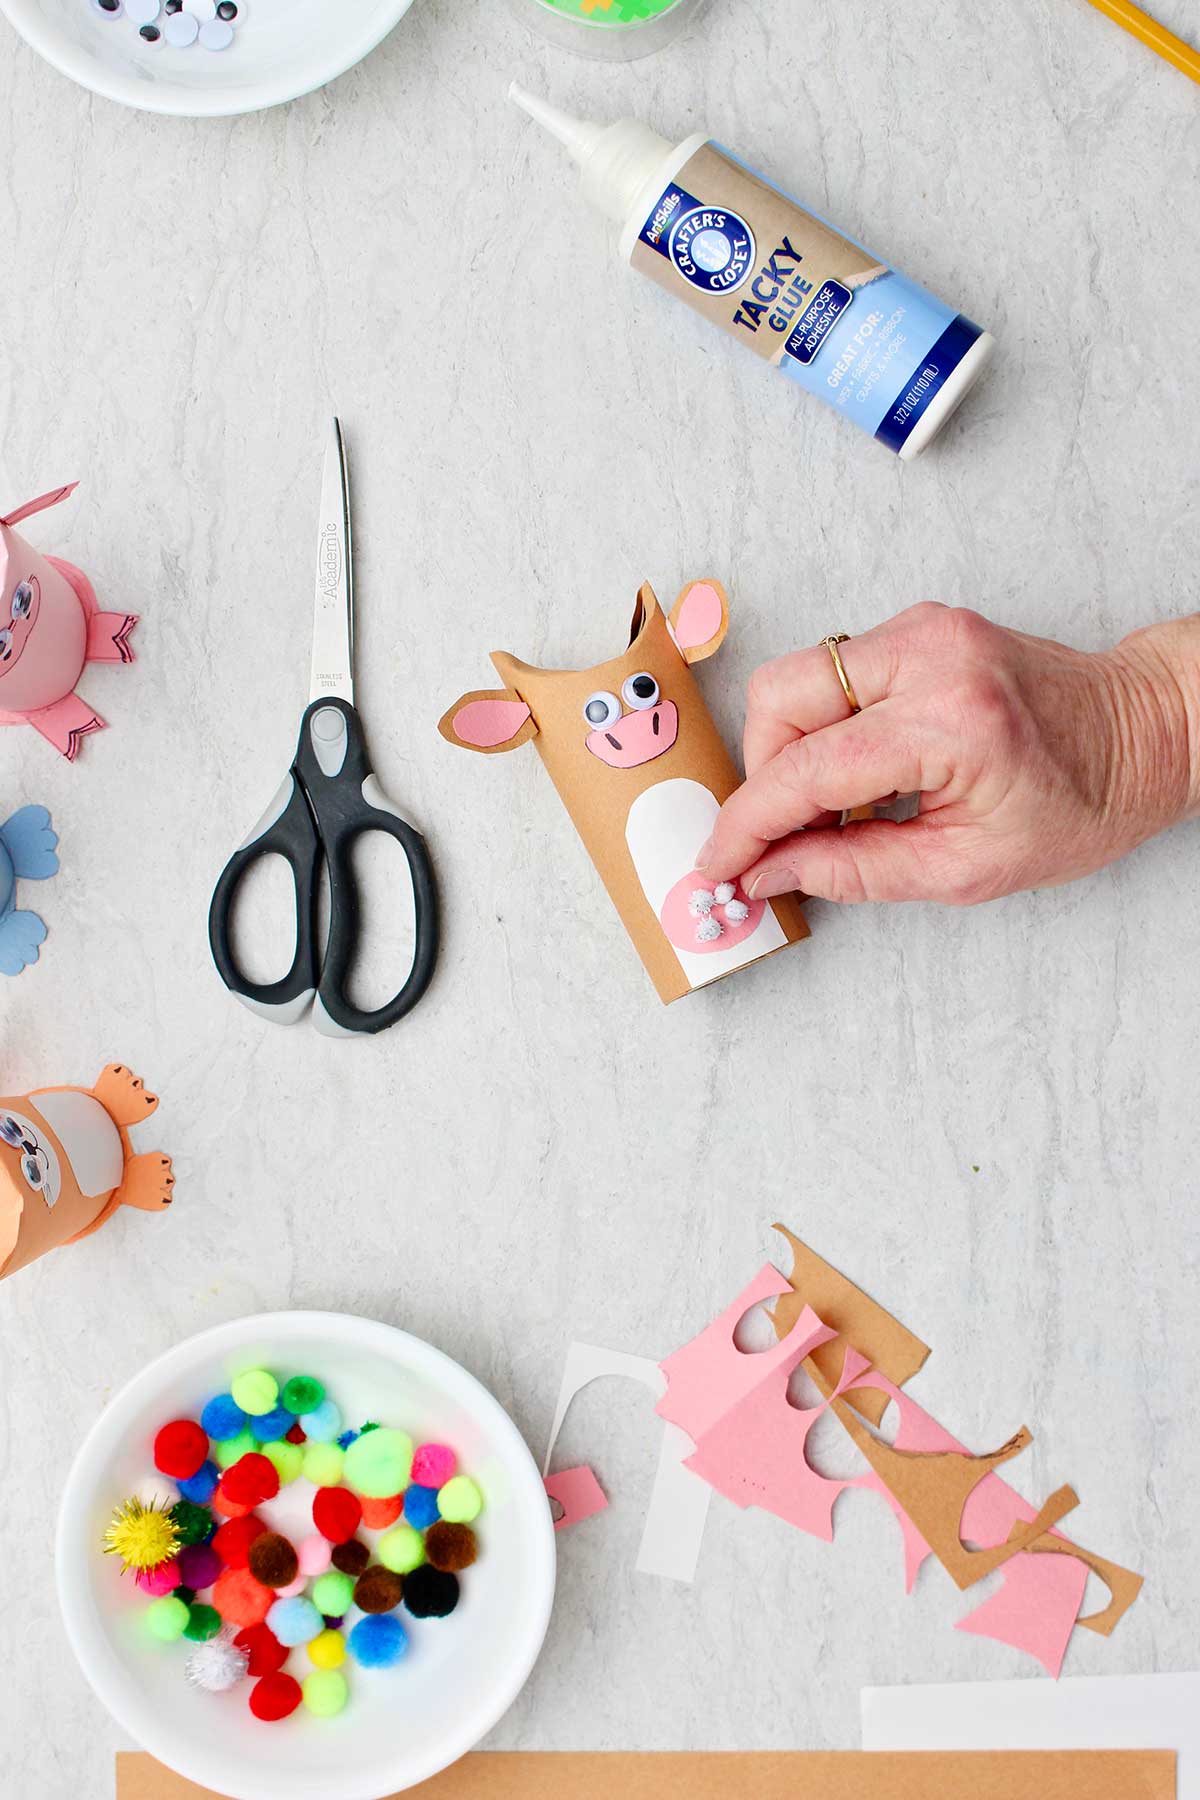 Hand adding white pom pom details to cow toilet paper roll animal.